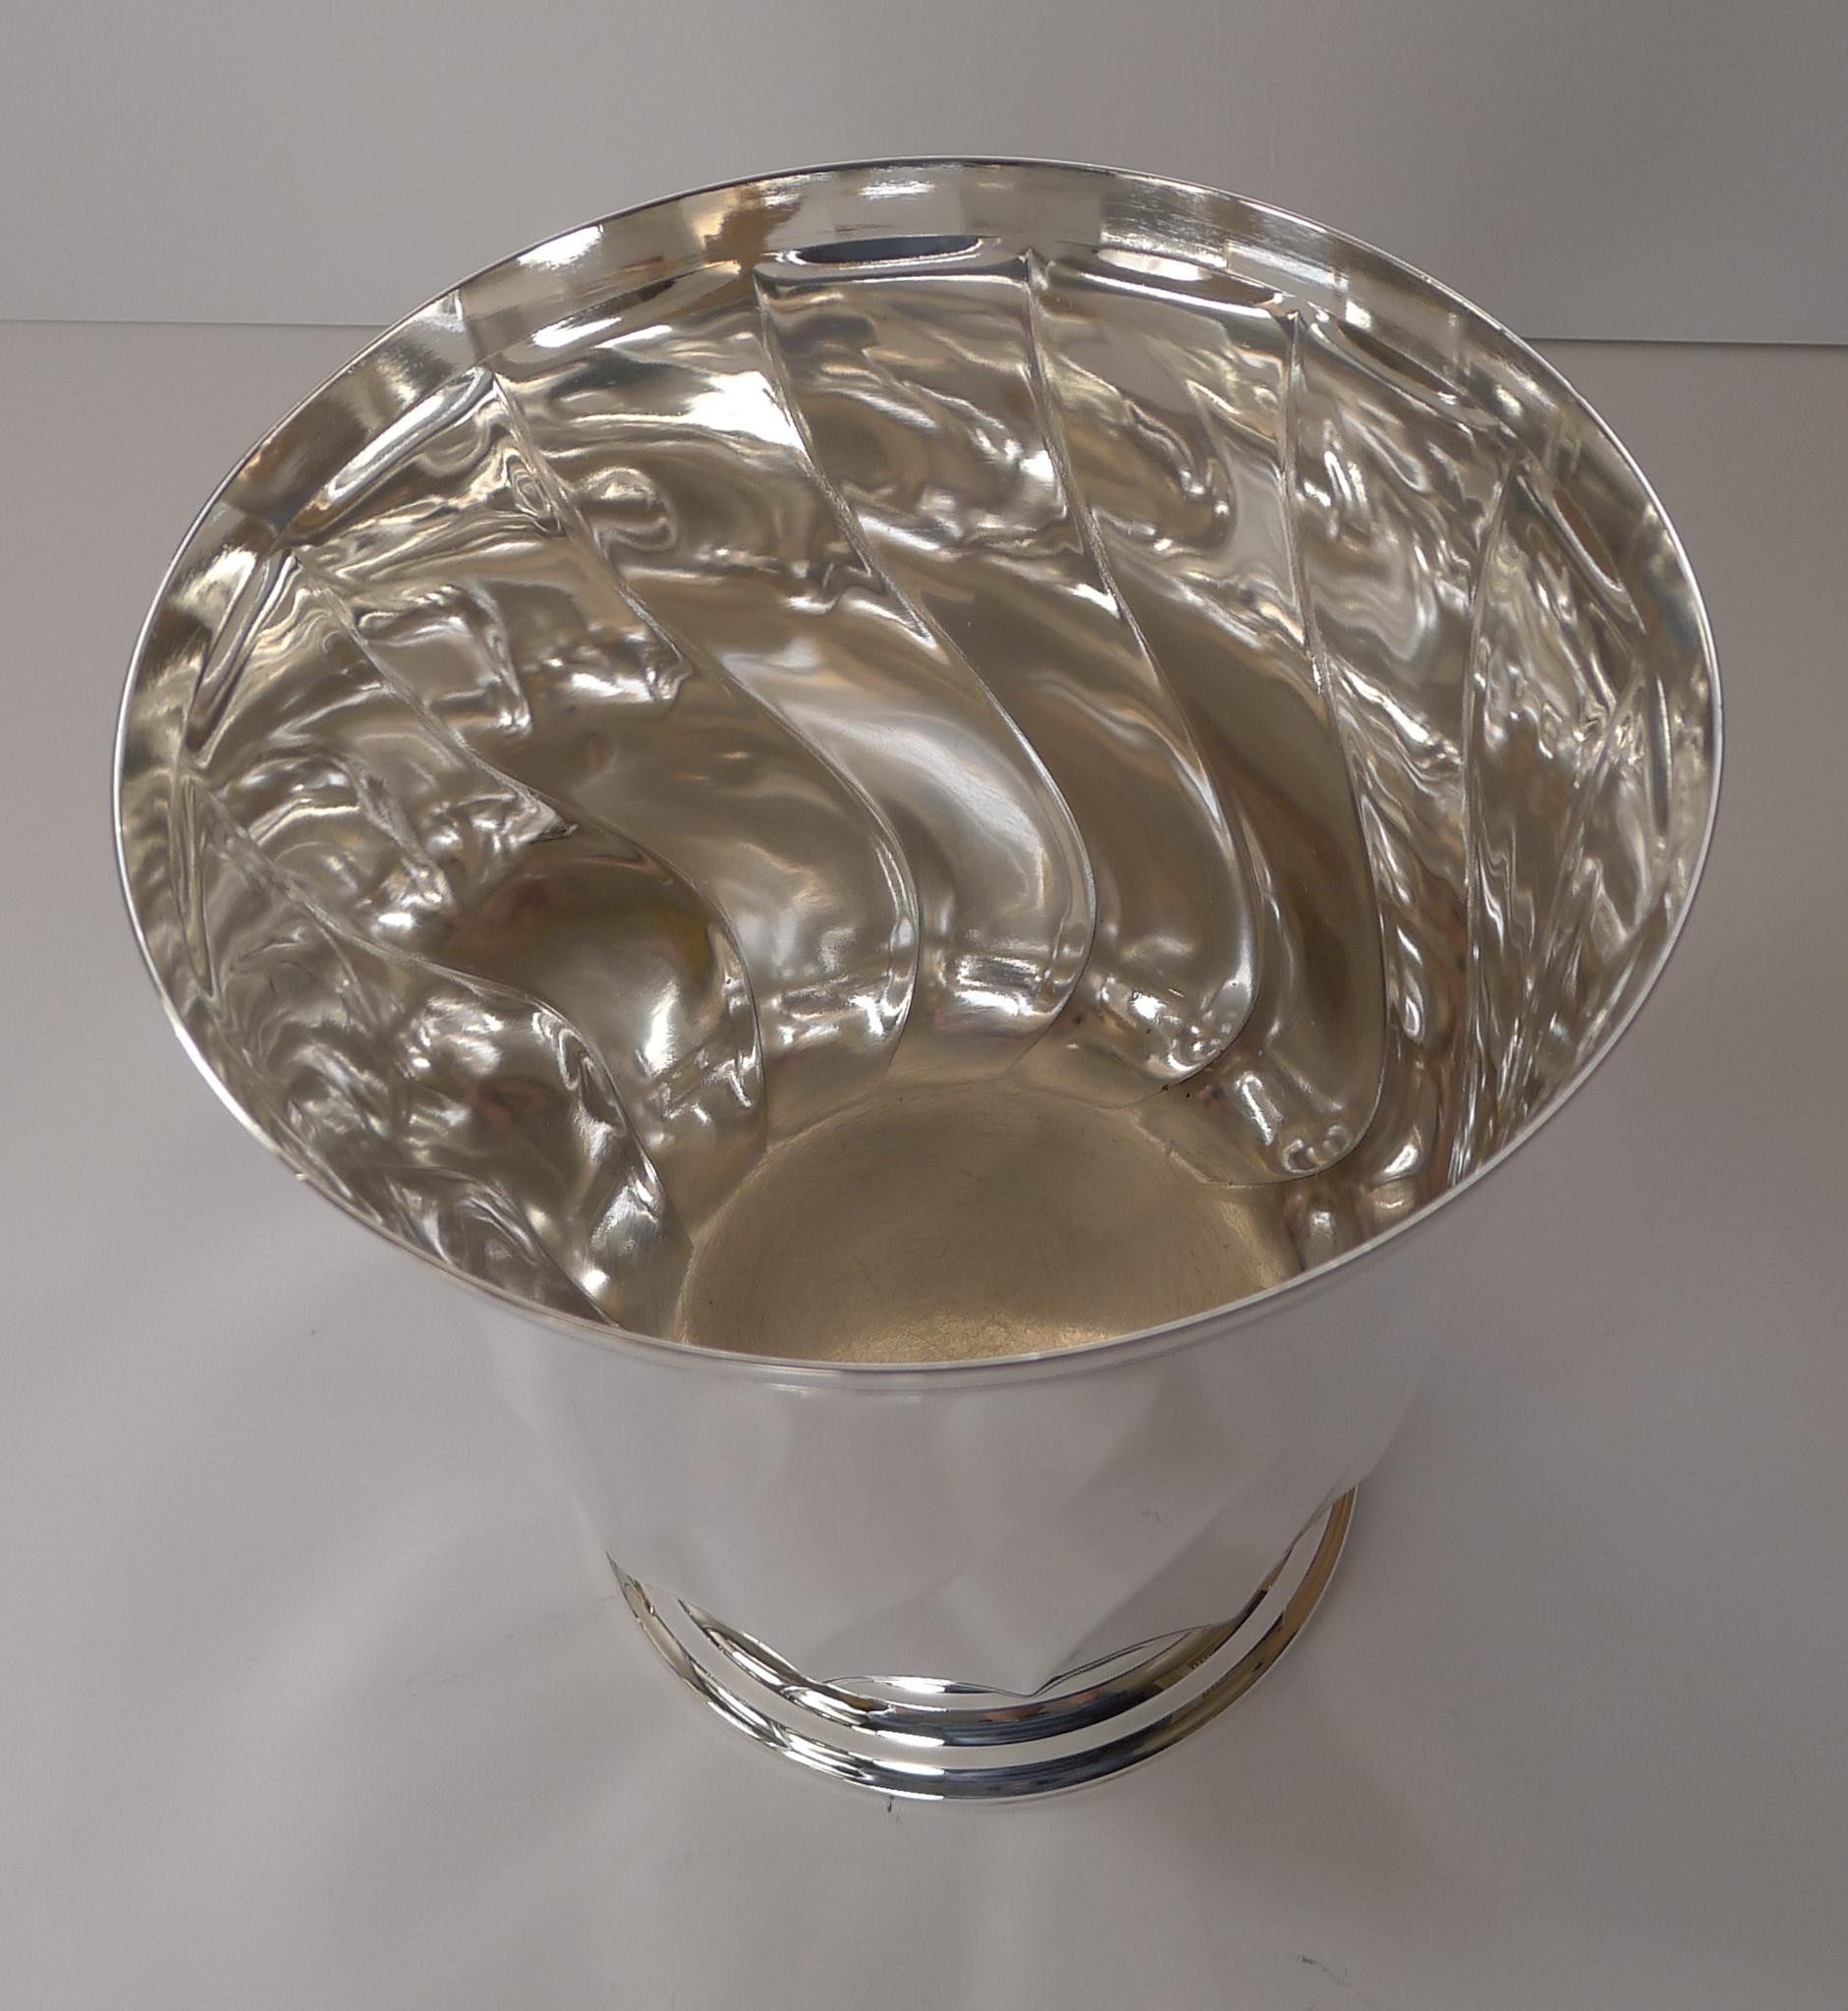 Modern Vintage French Champagne Bucket / Wine Cooler by Christofle, Paris